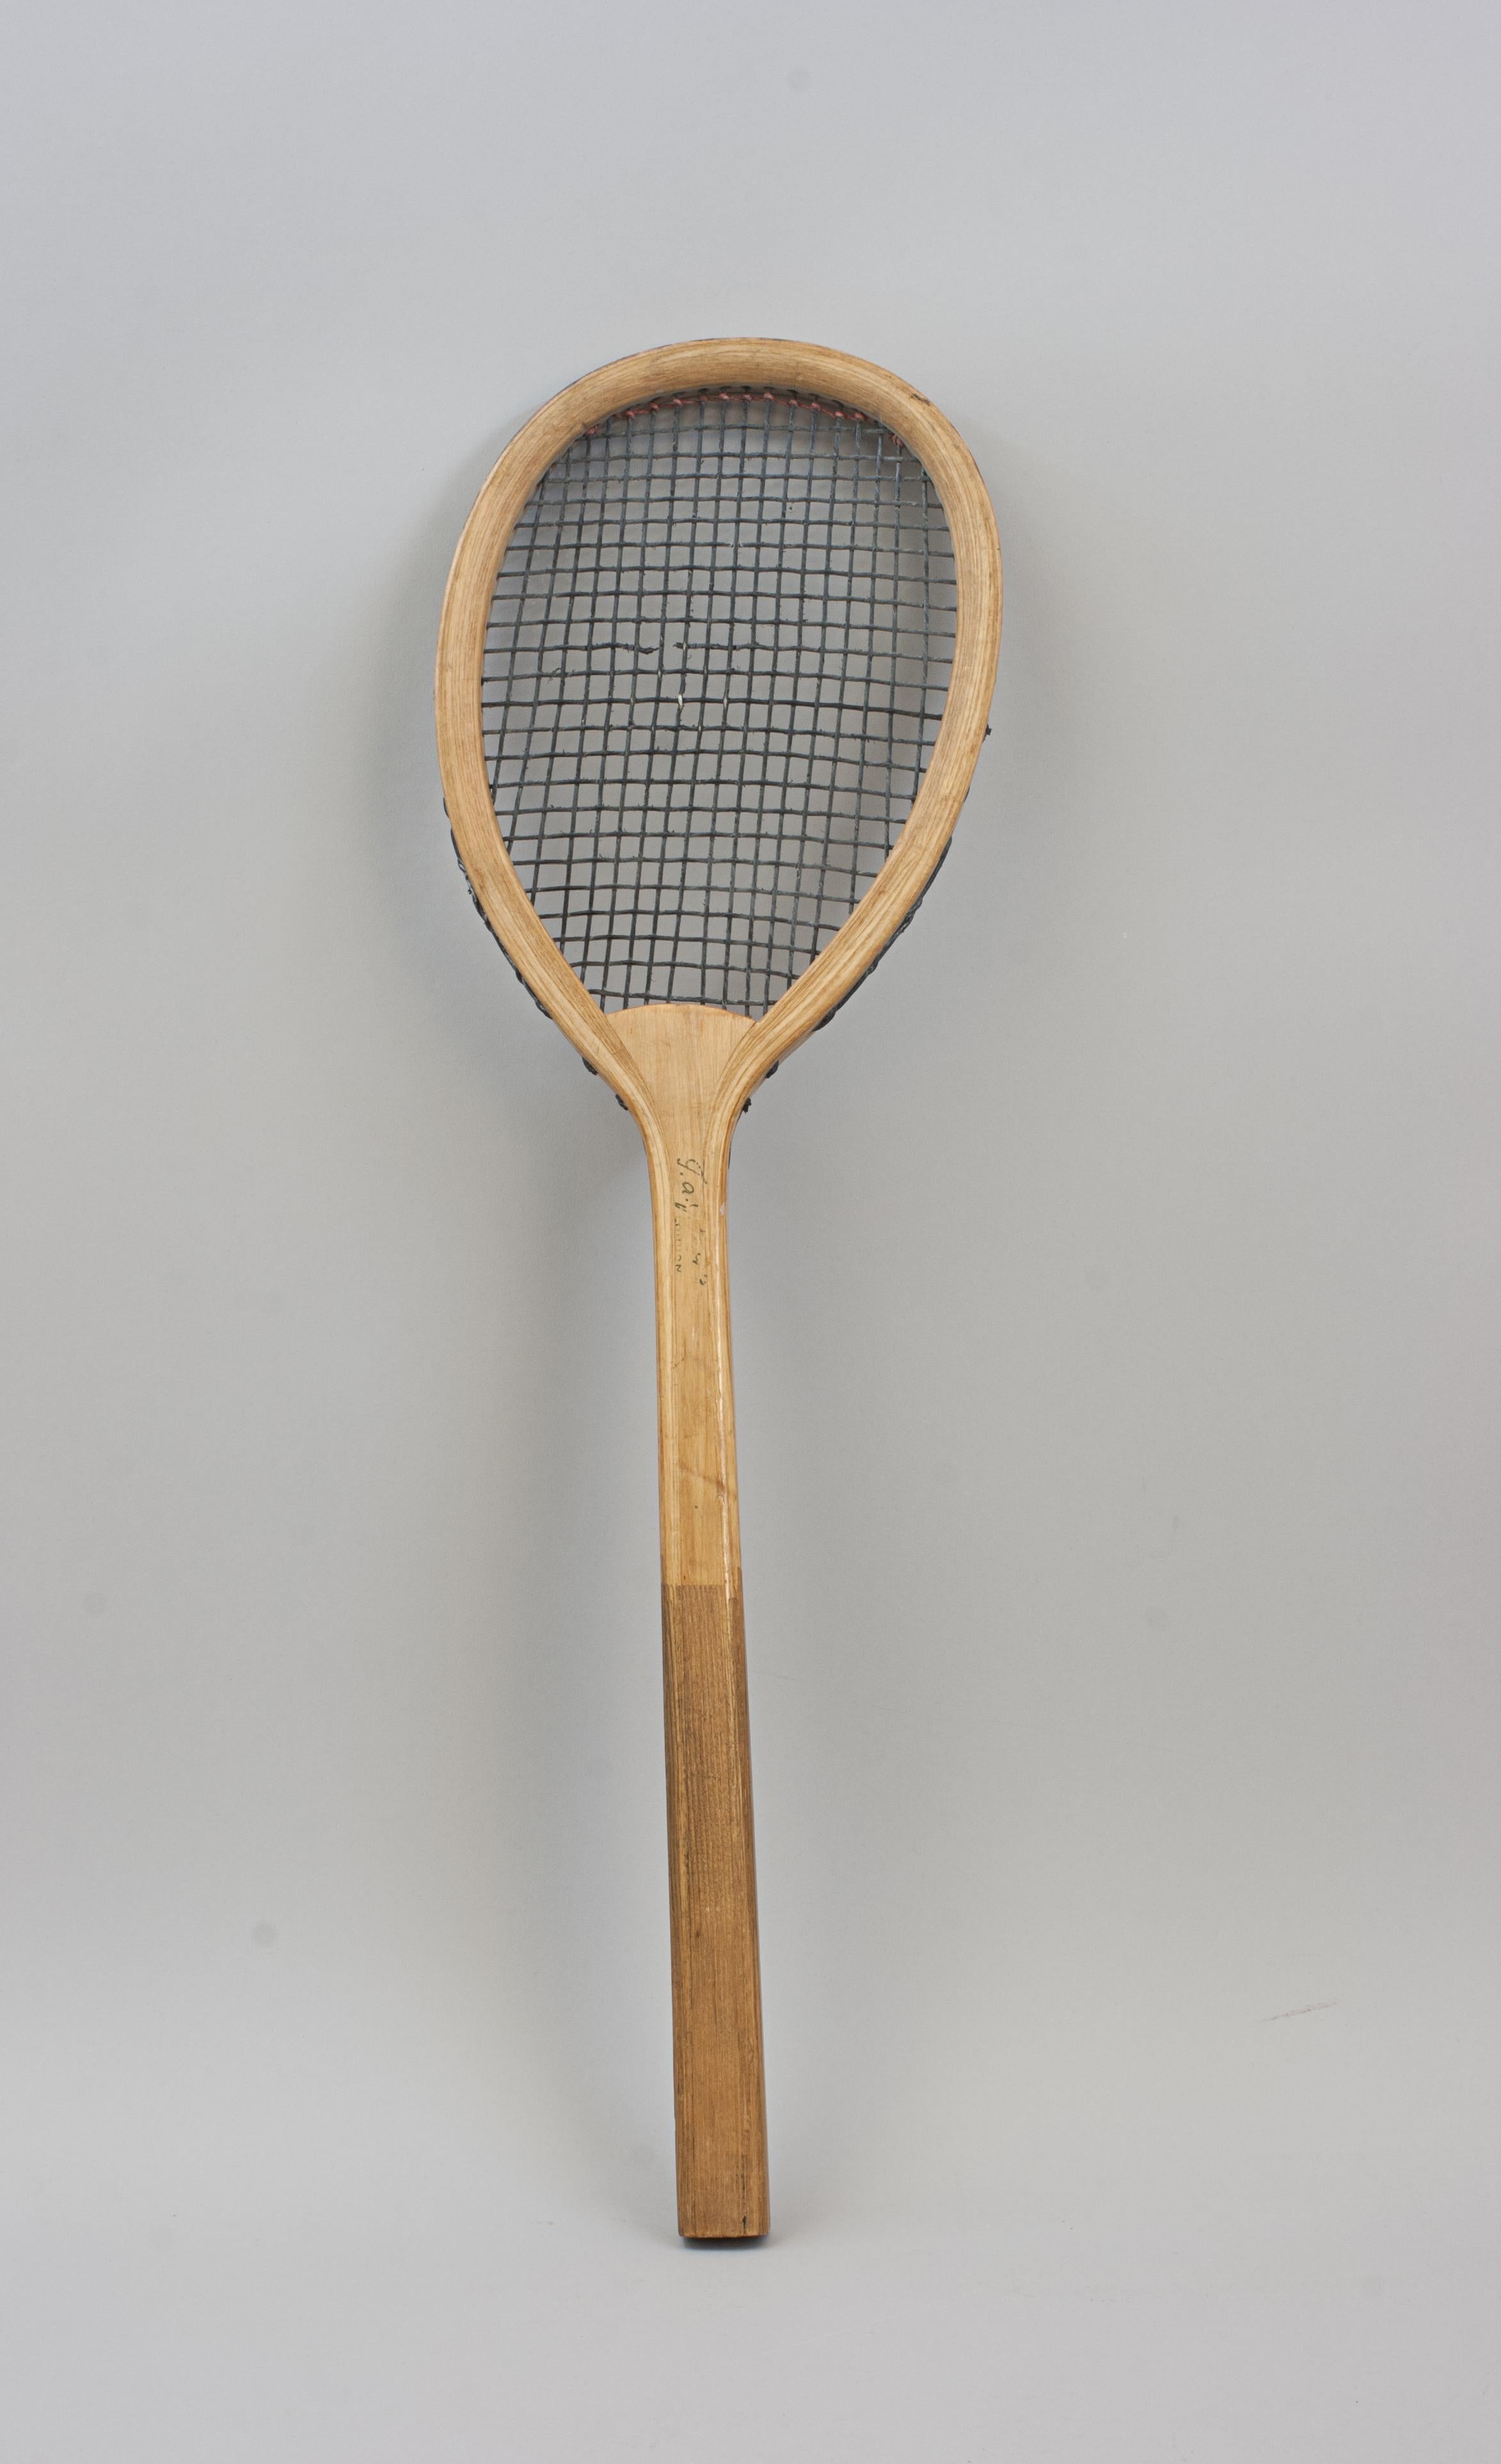 Vintage Harris Real Tennis Racket.
A good real tennis racket with original black stringing (one broken string) made by T.A.J. Harris, London. The ash frame in good condition with the characteristic offset or tilt-top shape. There is the remains of a